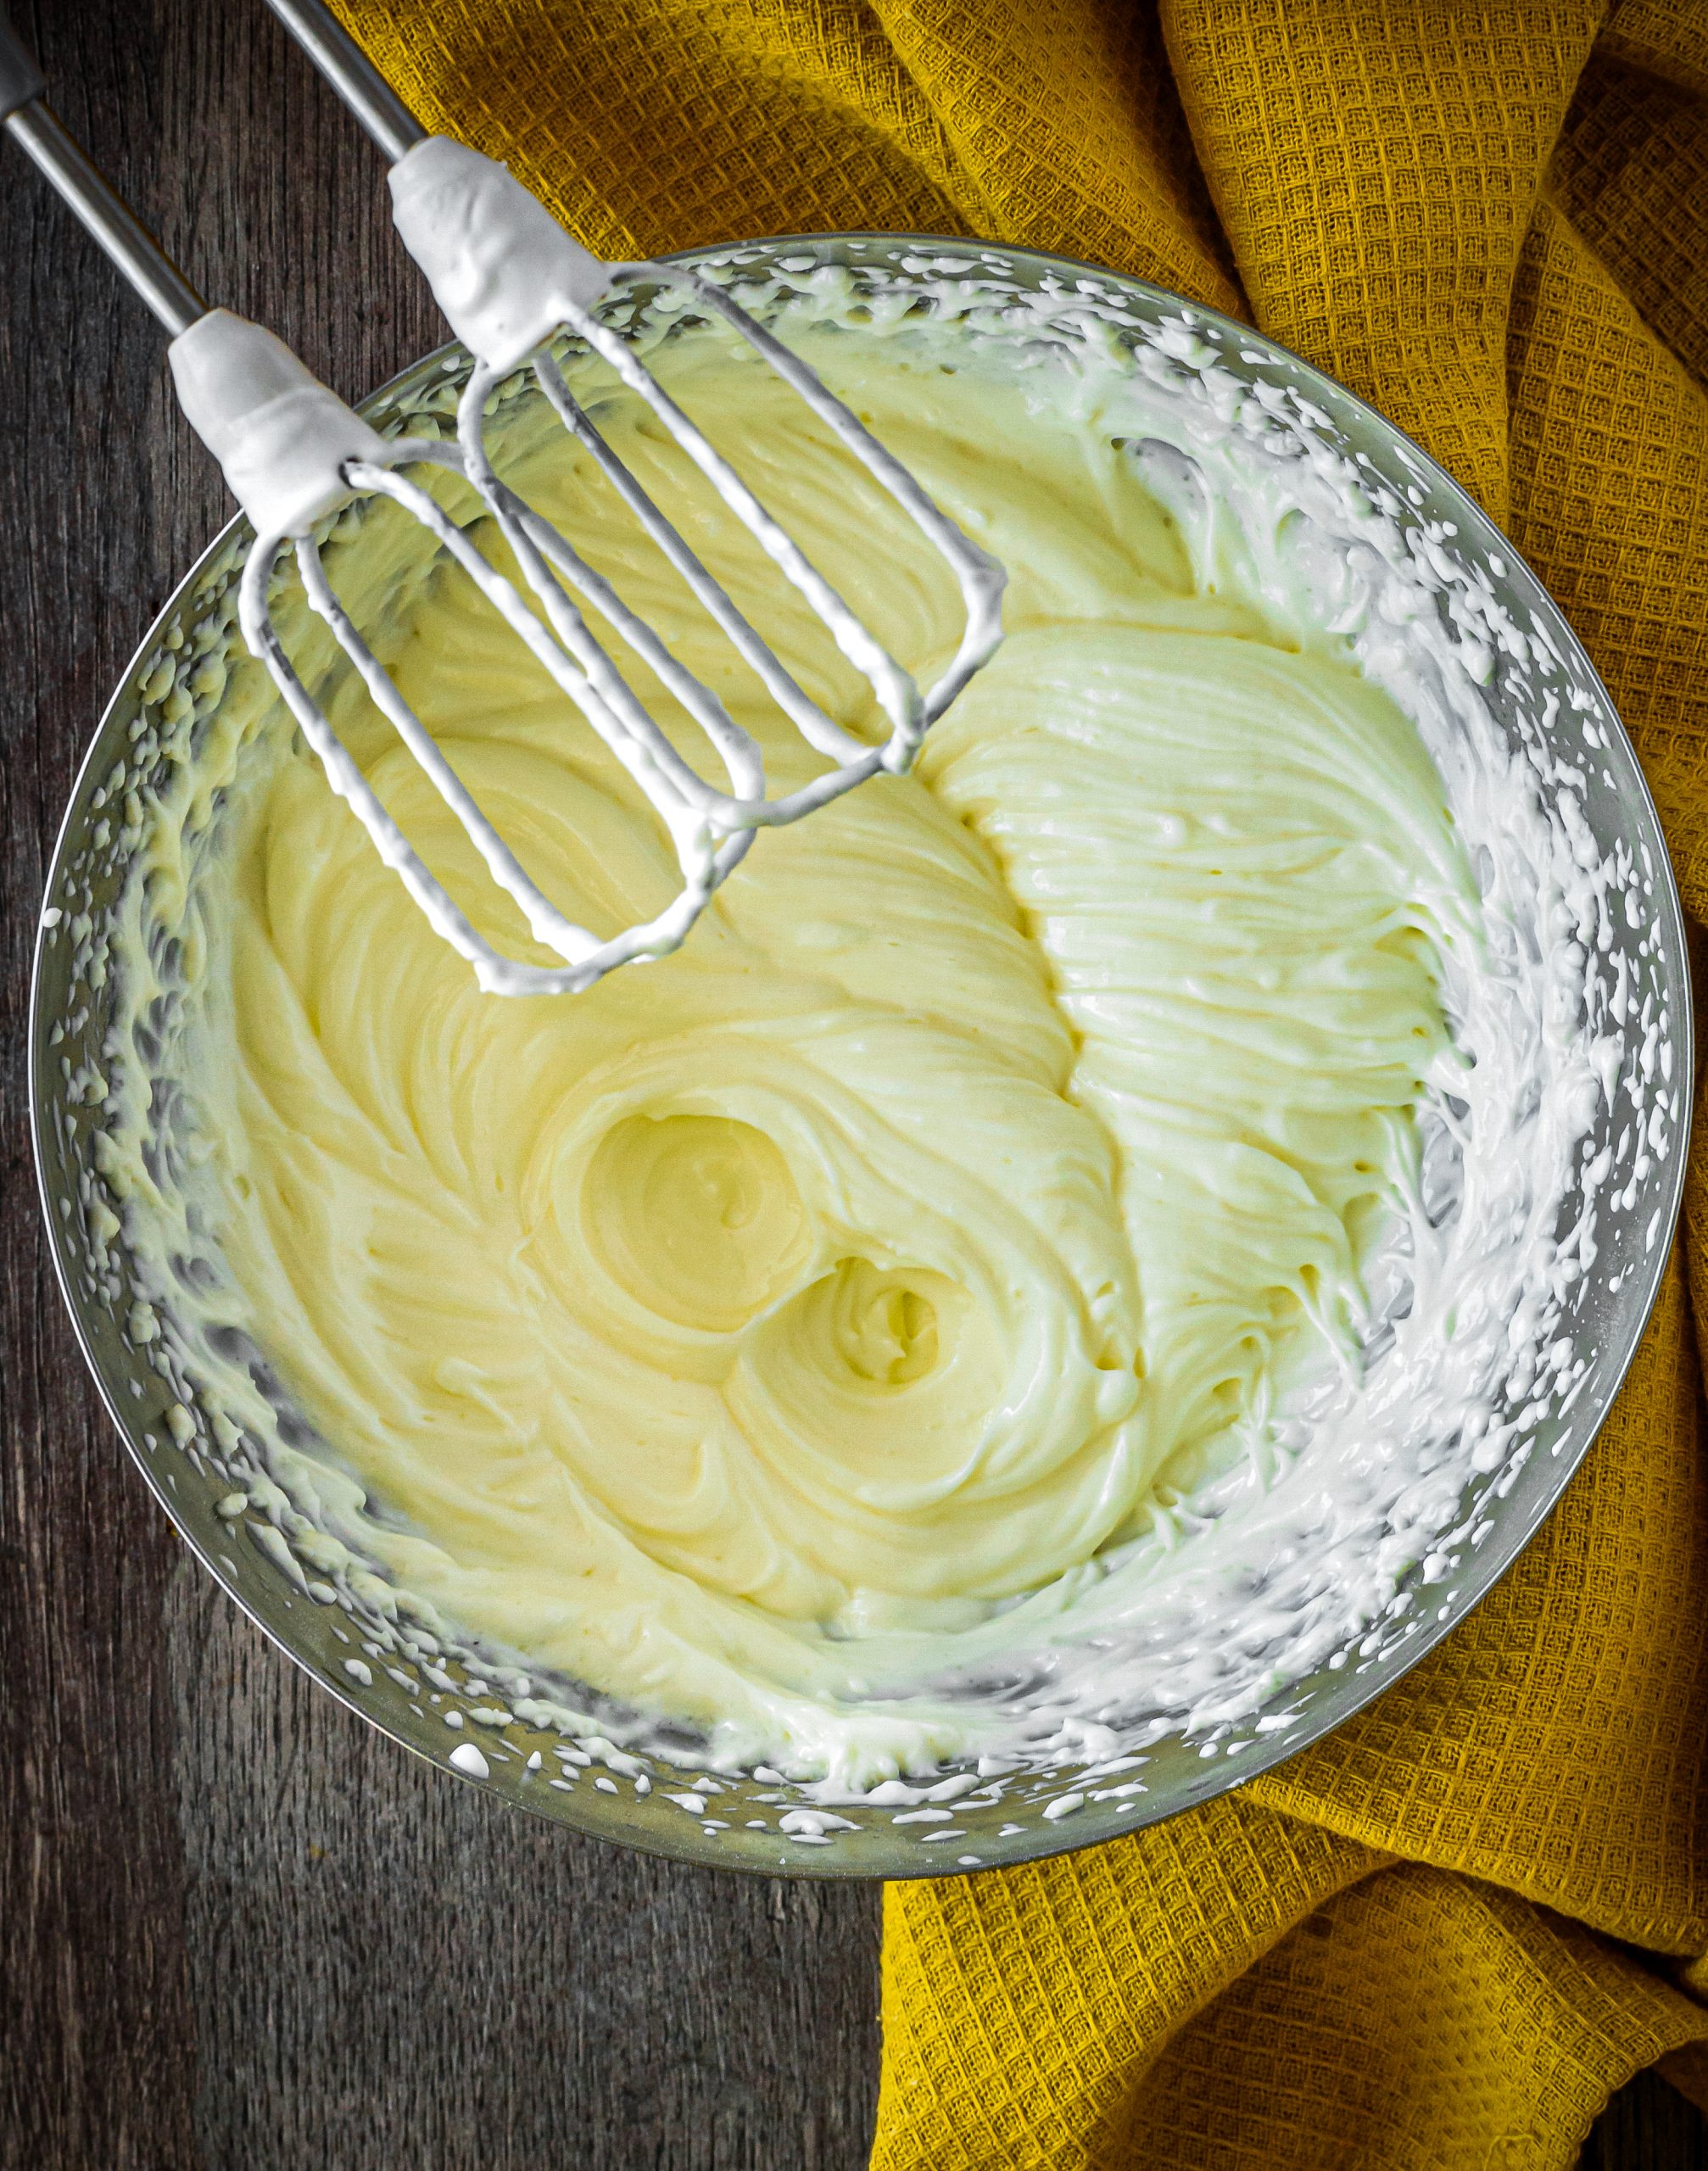 In a separate bowl, whisk together the heavy whipping cream and 2 Tbsp of powdered sugar until stiff peaks form. 